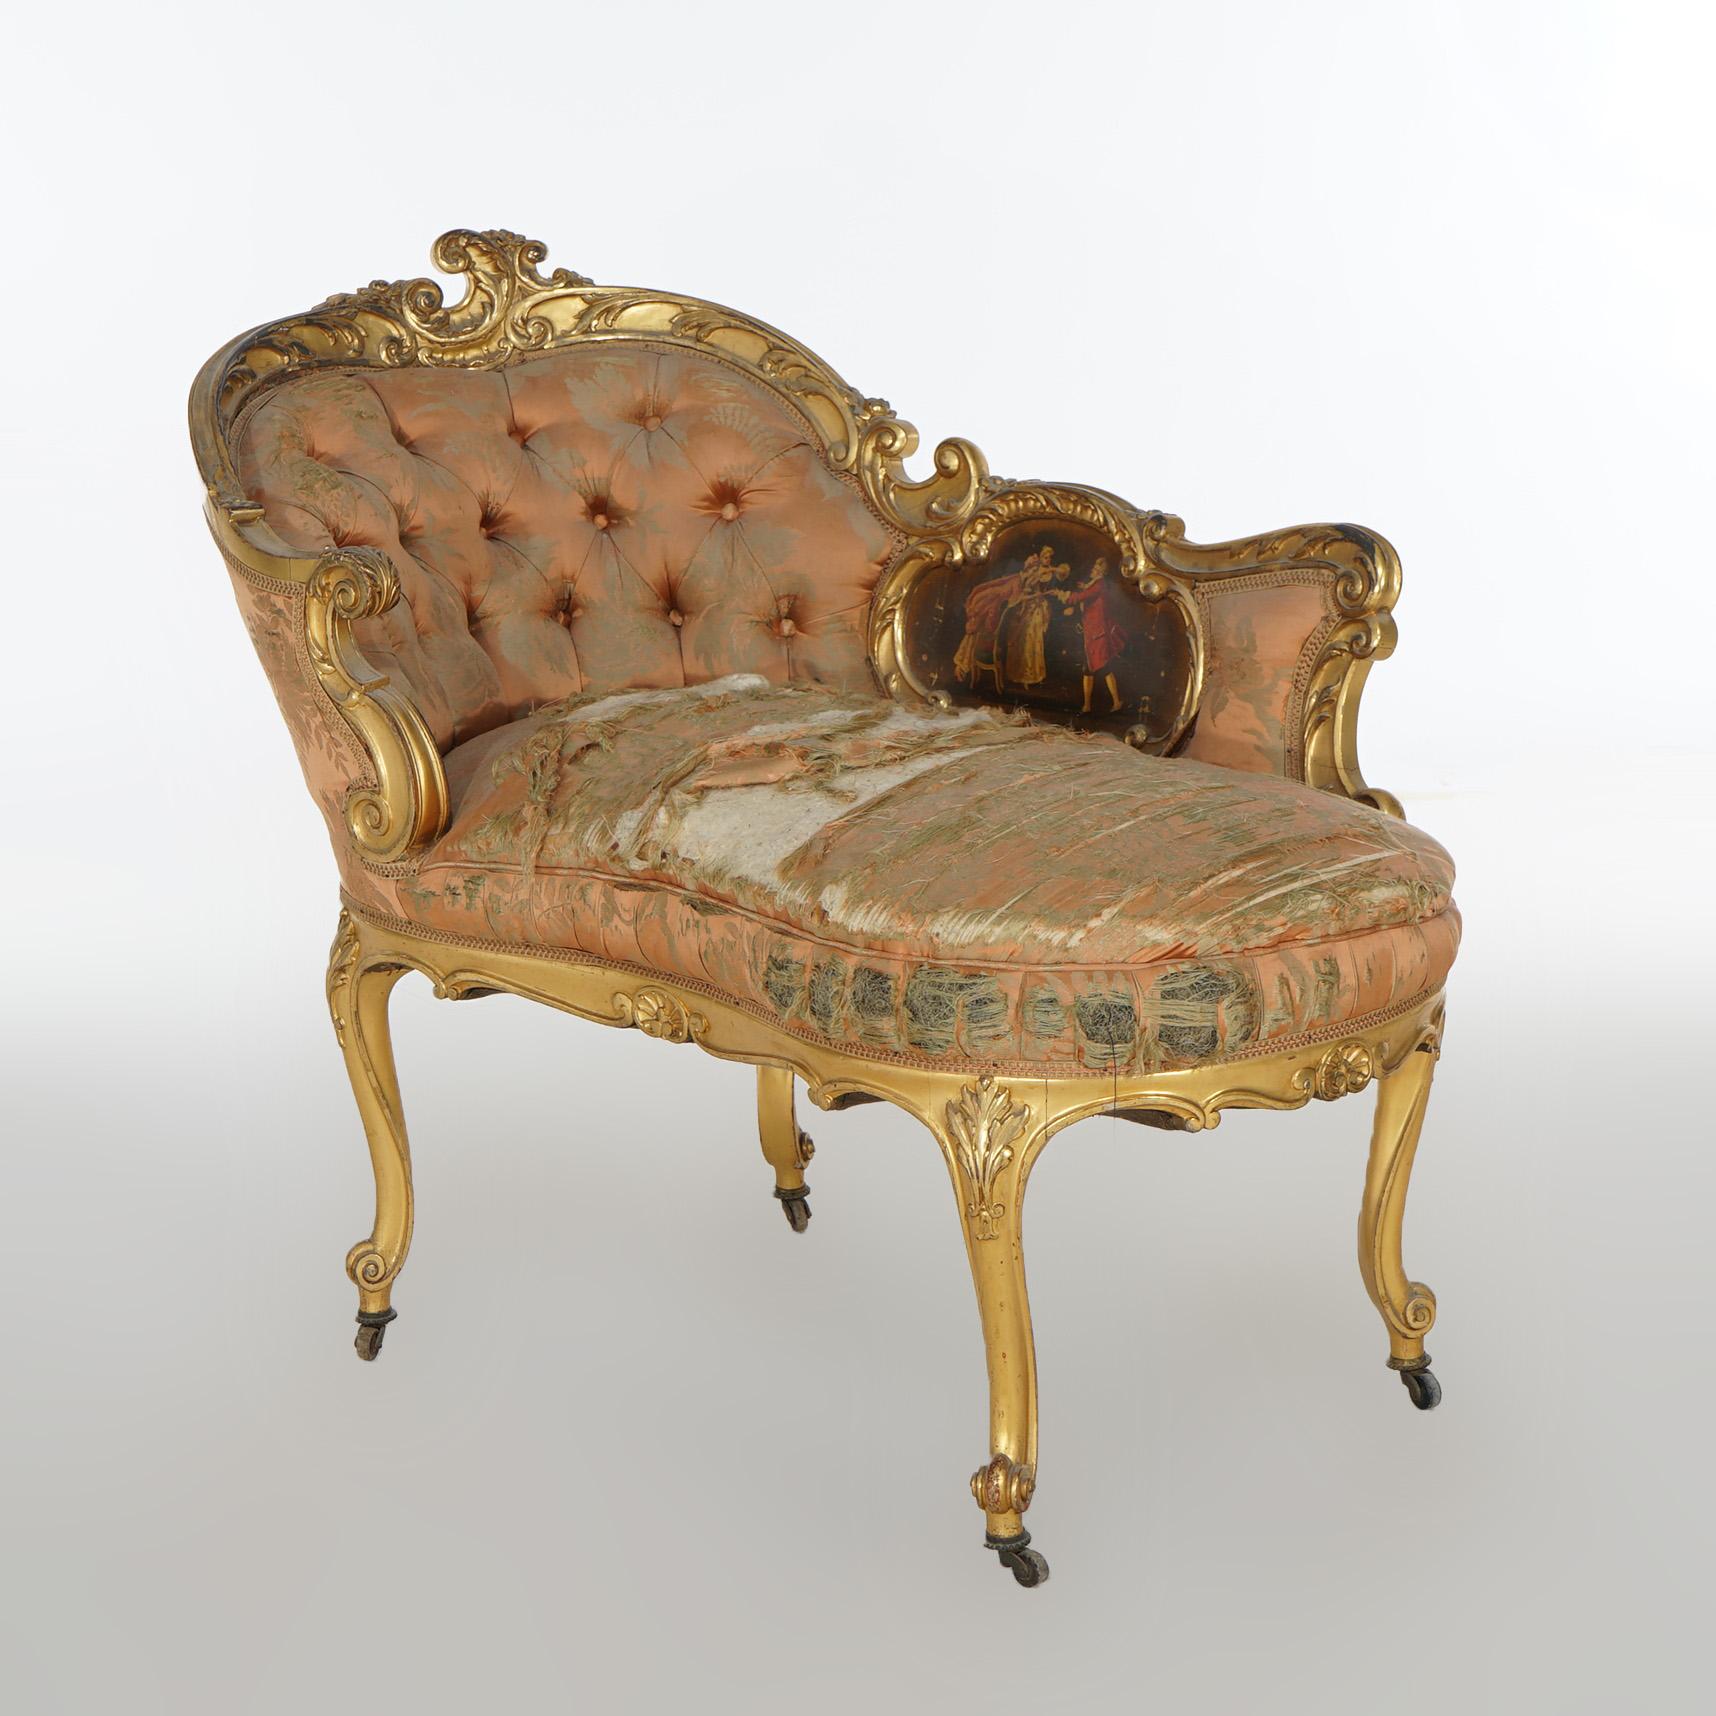 Early Antique French Rococo Vernis Martin & Giltwood Half-Recamier Settee 19th C In Good Condition For Sale In Big Flats, NY